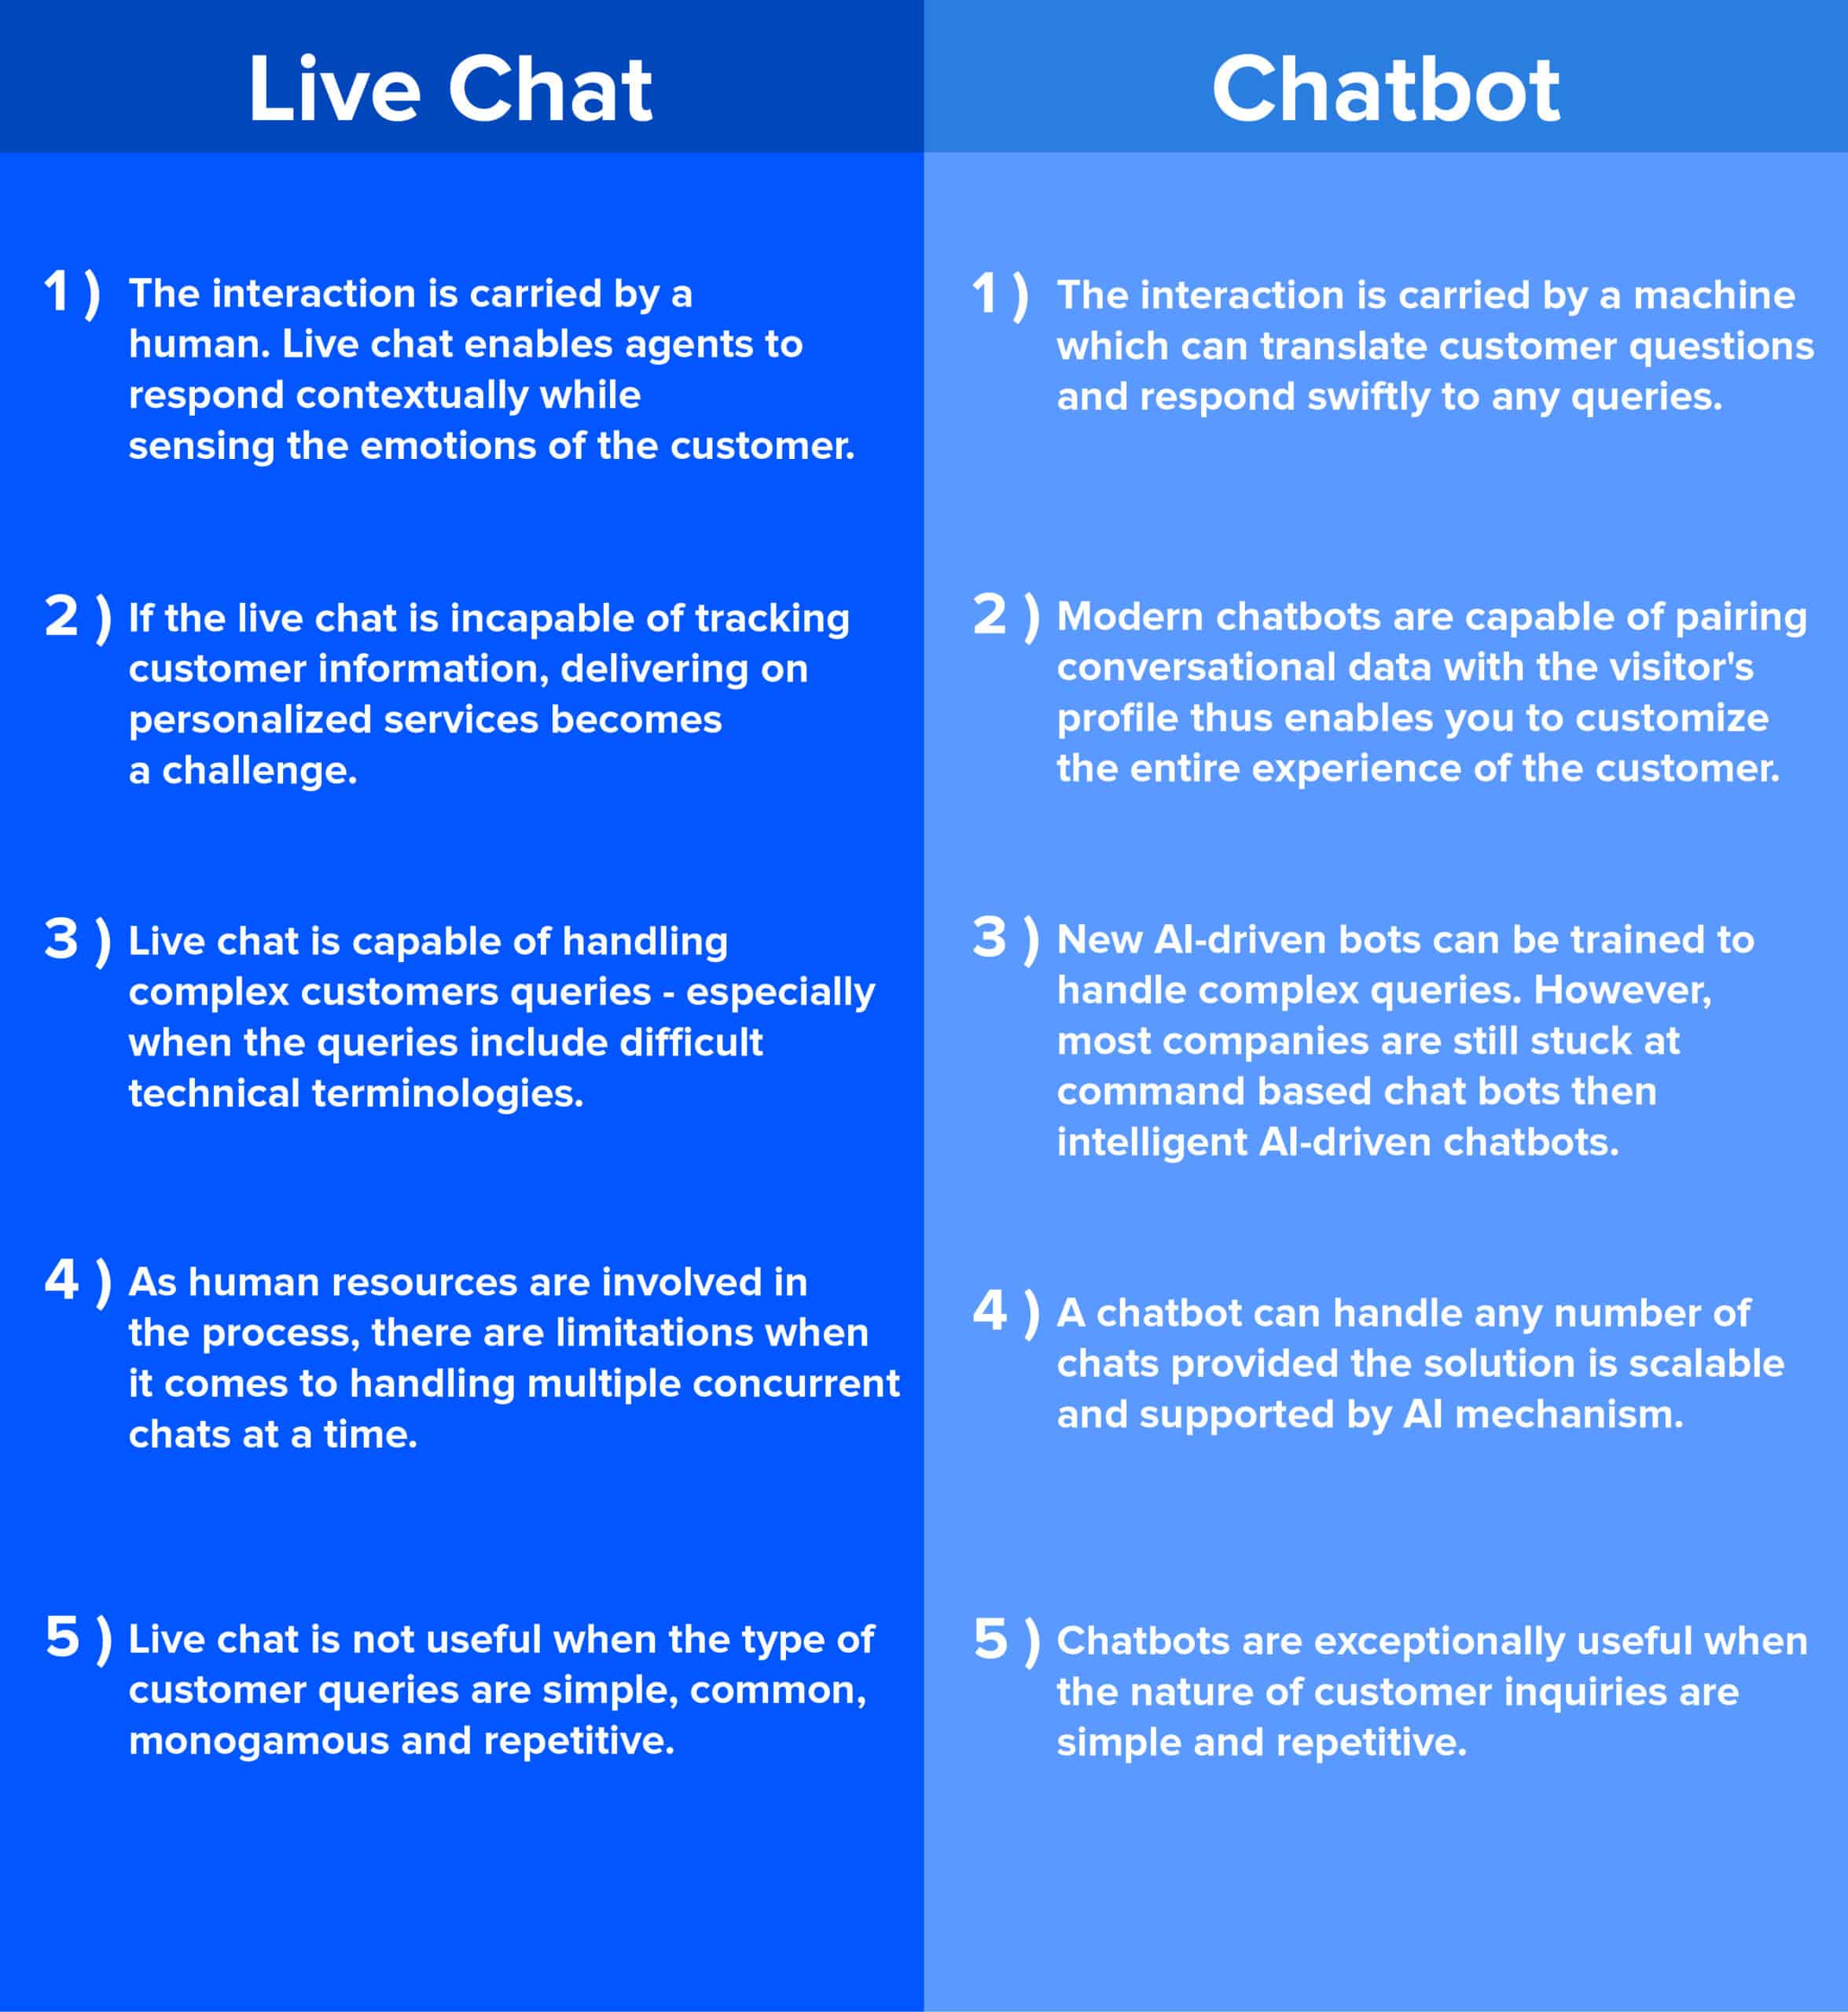 chart showing live chat compared to chatbots